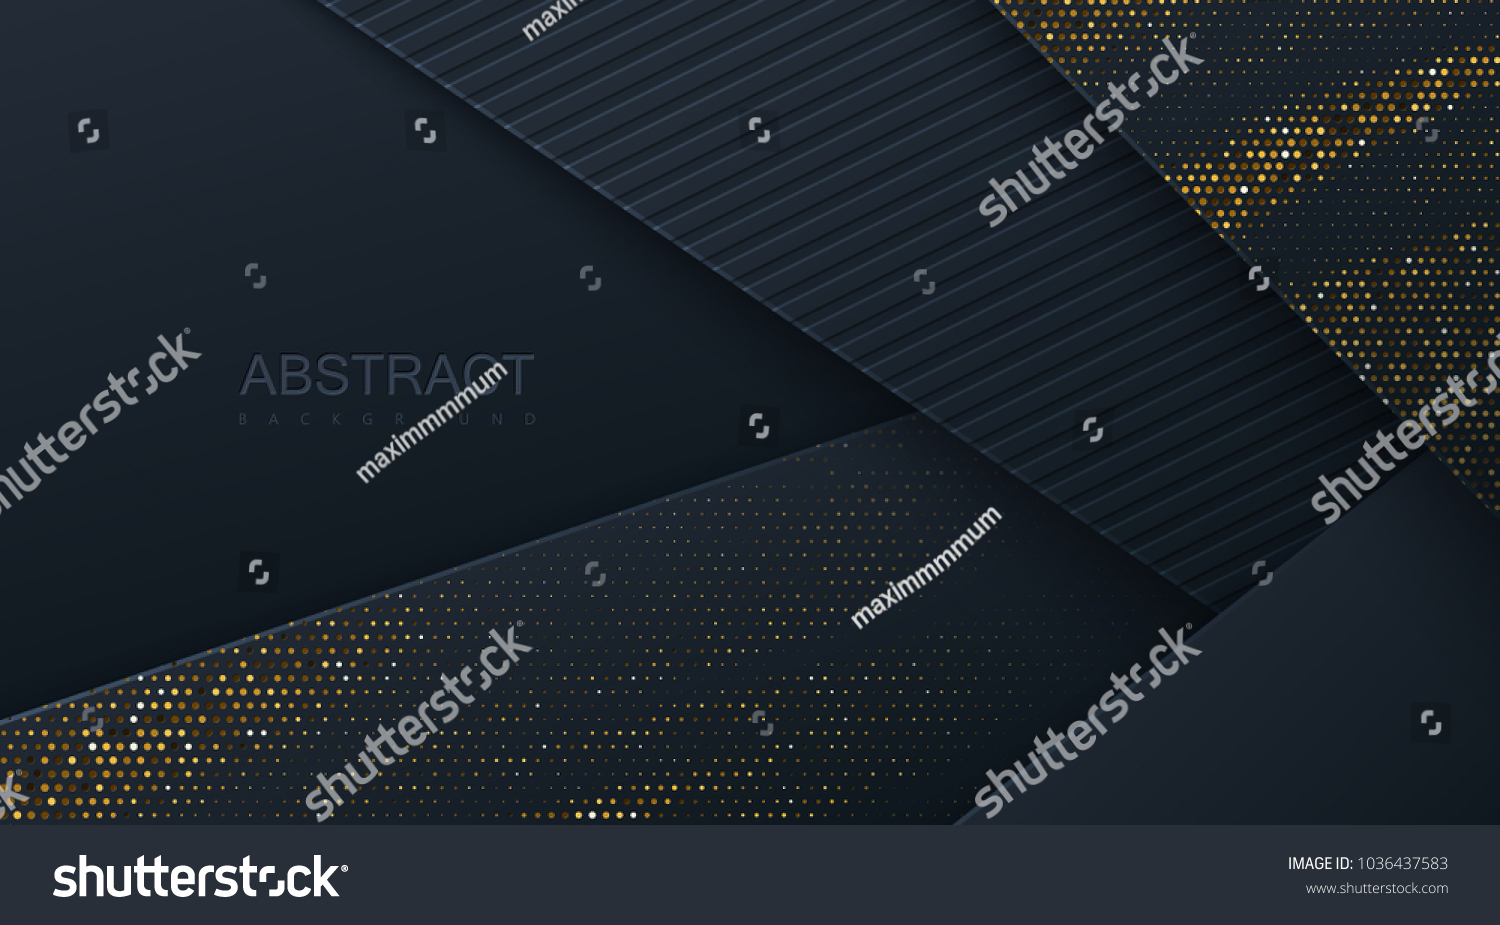 Abstract 3d background with black paper layers. Vector geometric illustration of carbon sliced shapes textured with golden glittering dots. Graphic design element. Elegant decoration #1036437583